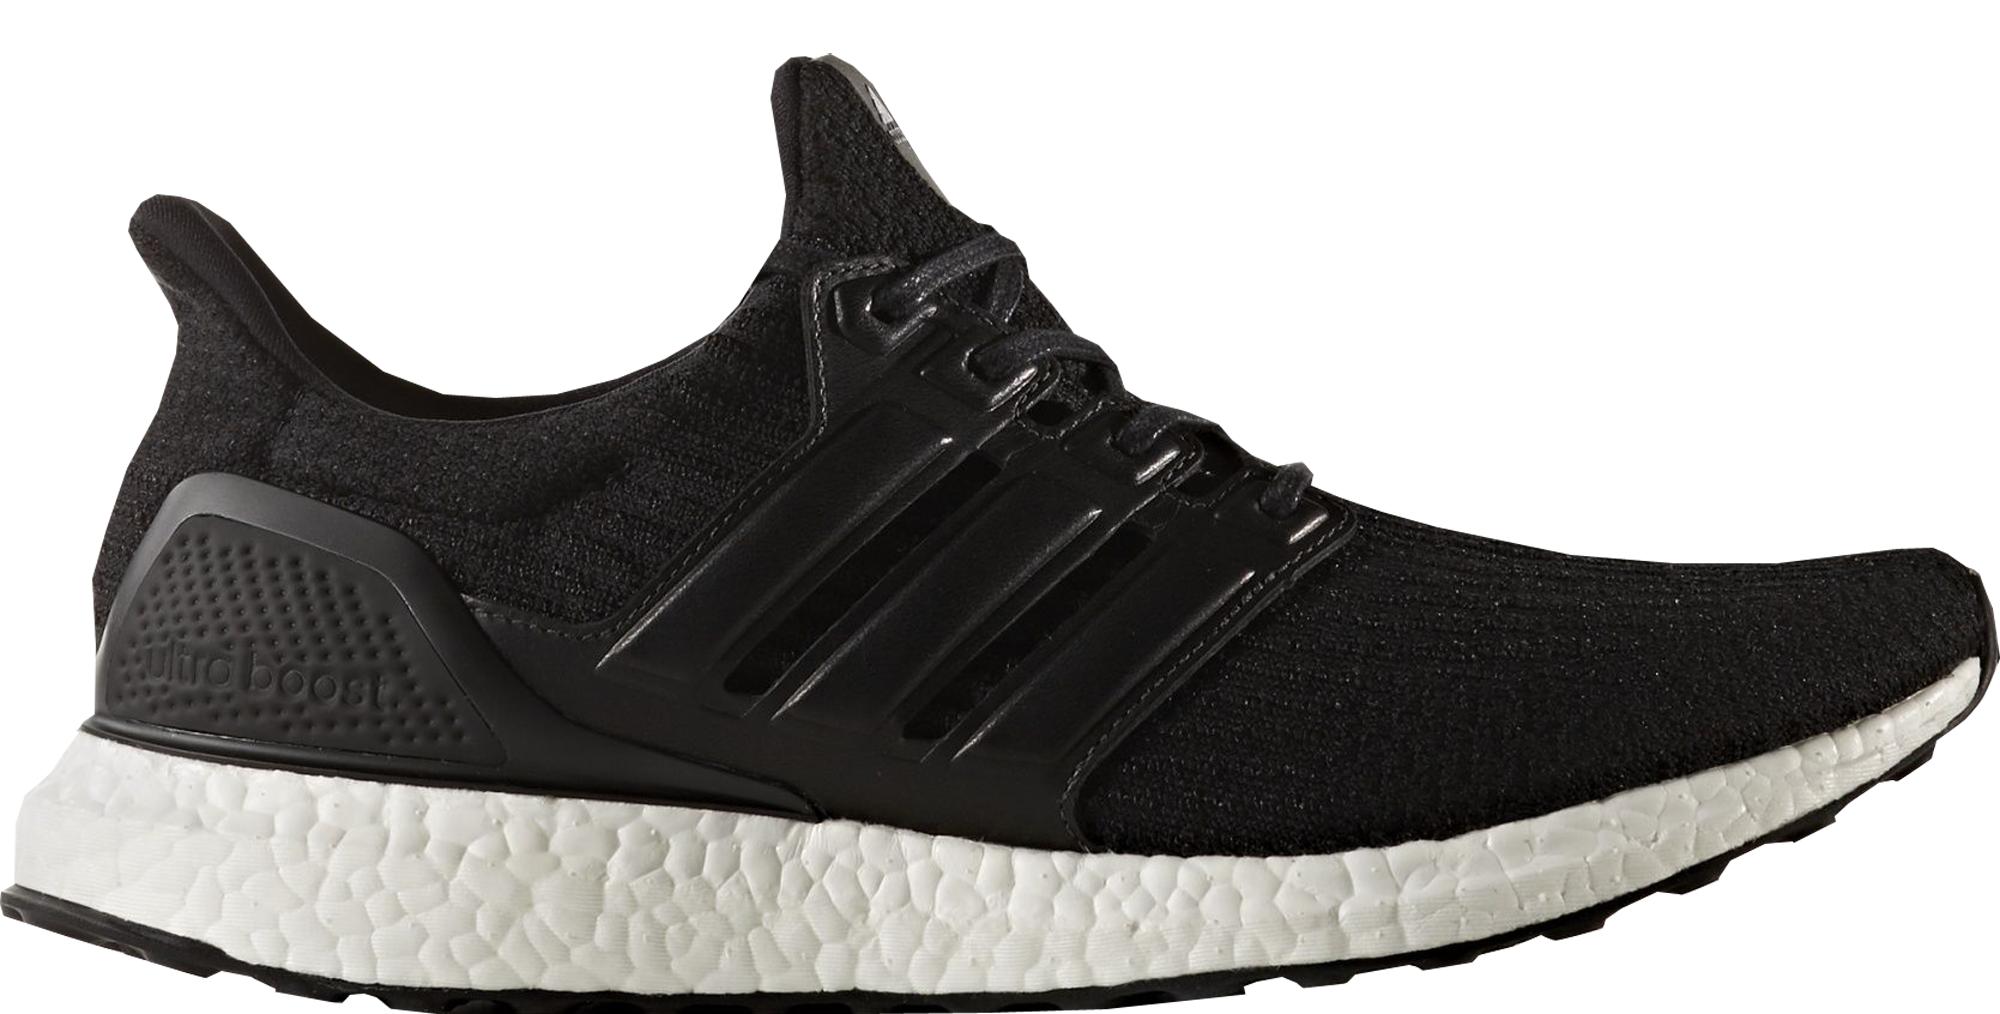 adidas Ultra Boost Black Leather Cage